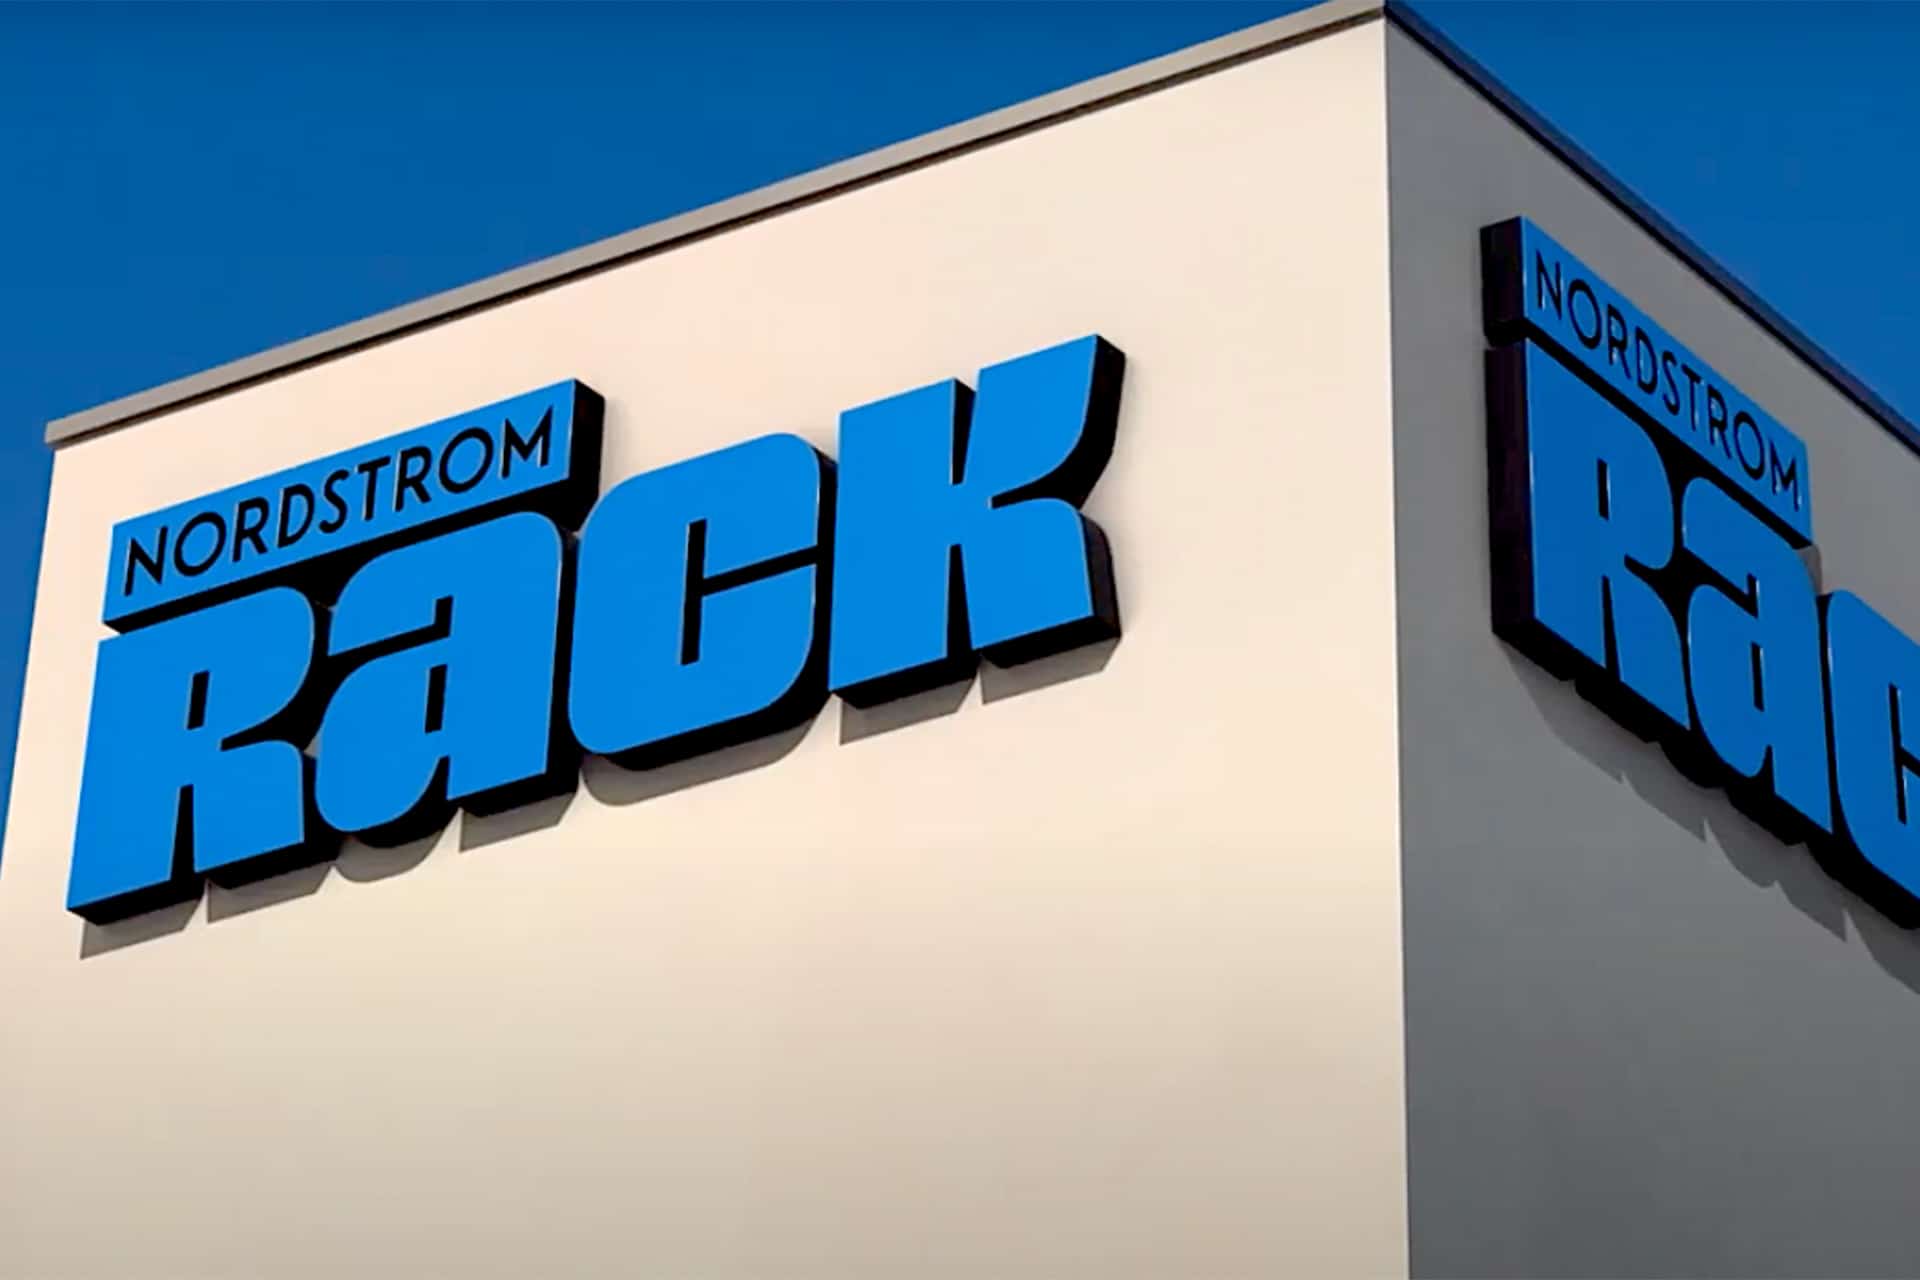 Nordstrom Continues Expanding Rack Operations